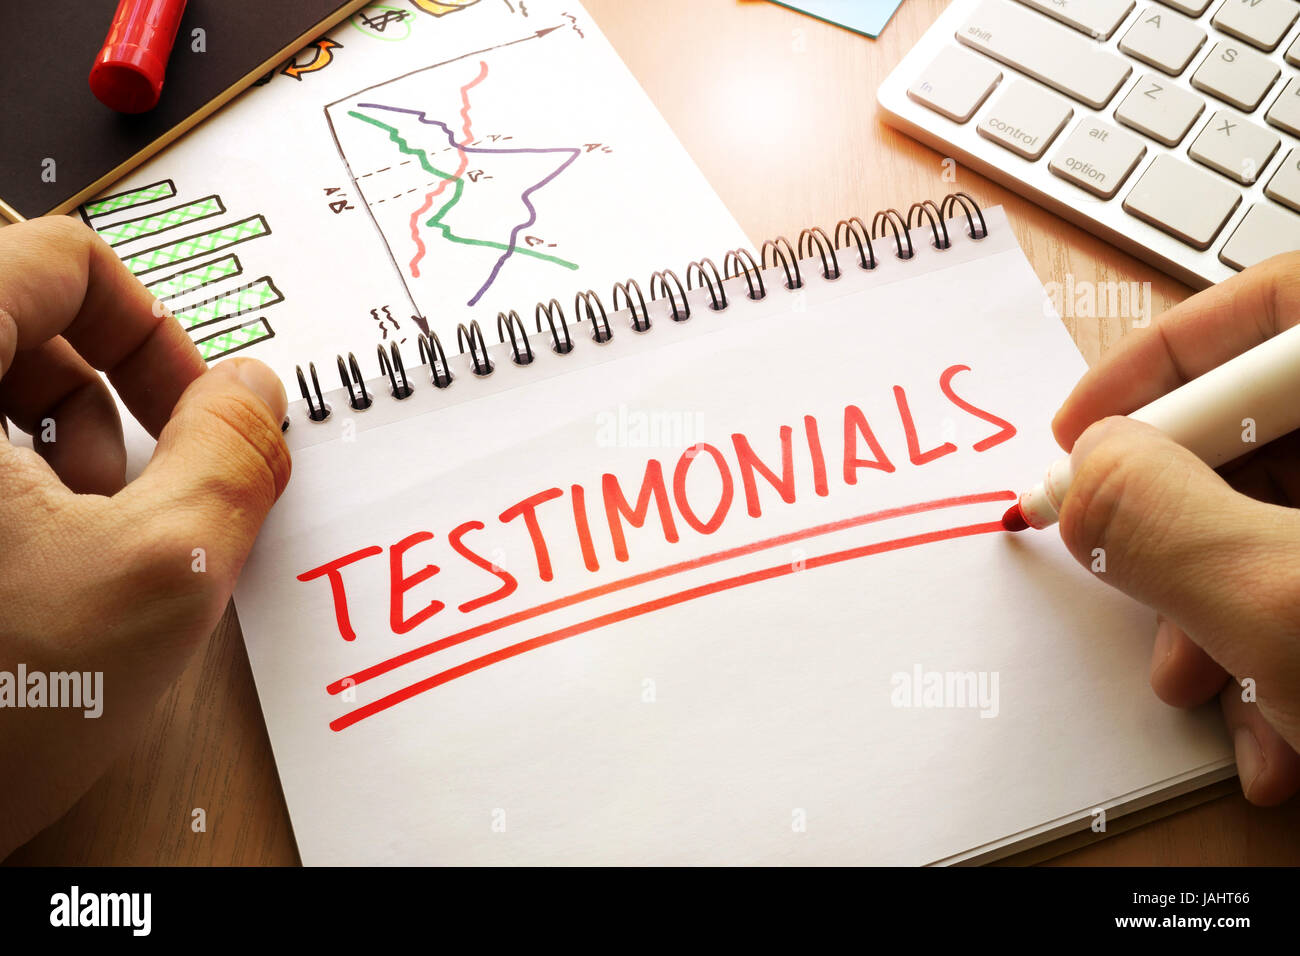 Testimonials written in a note. Client communication concept. Stock Photo